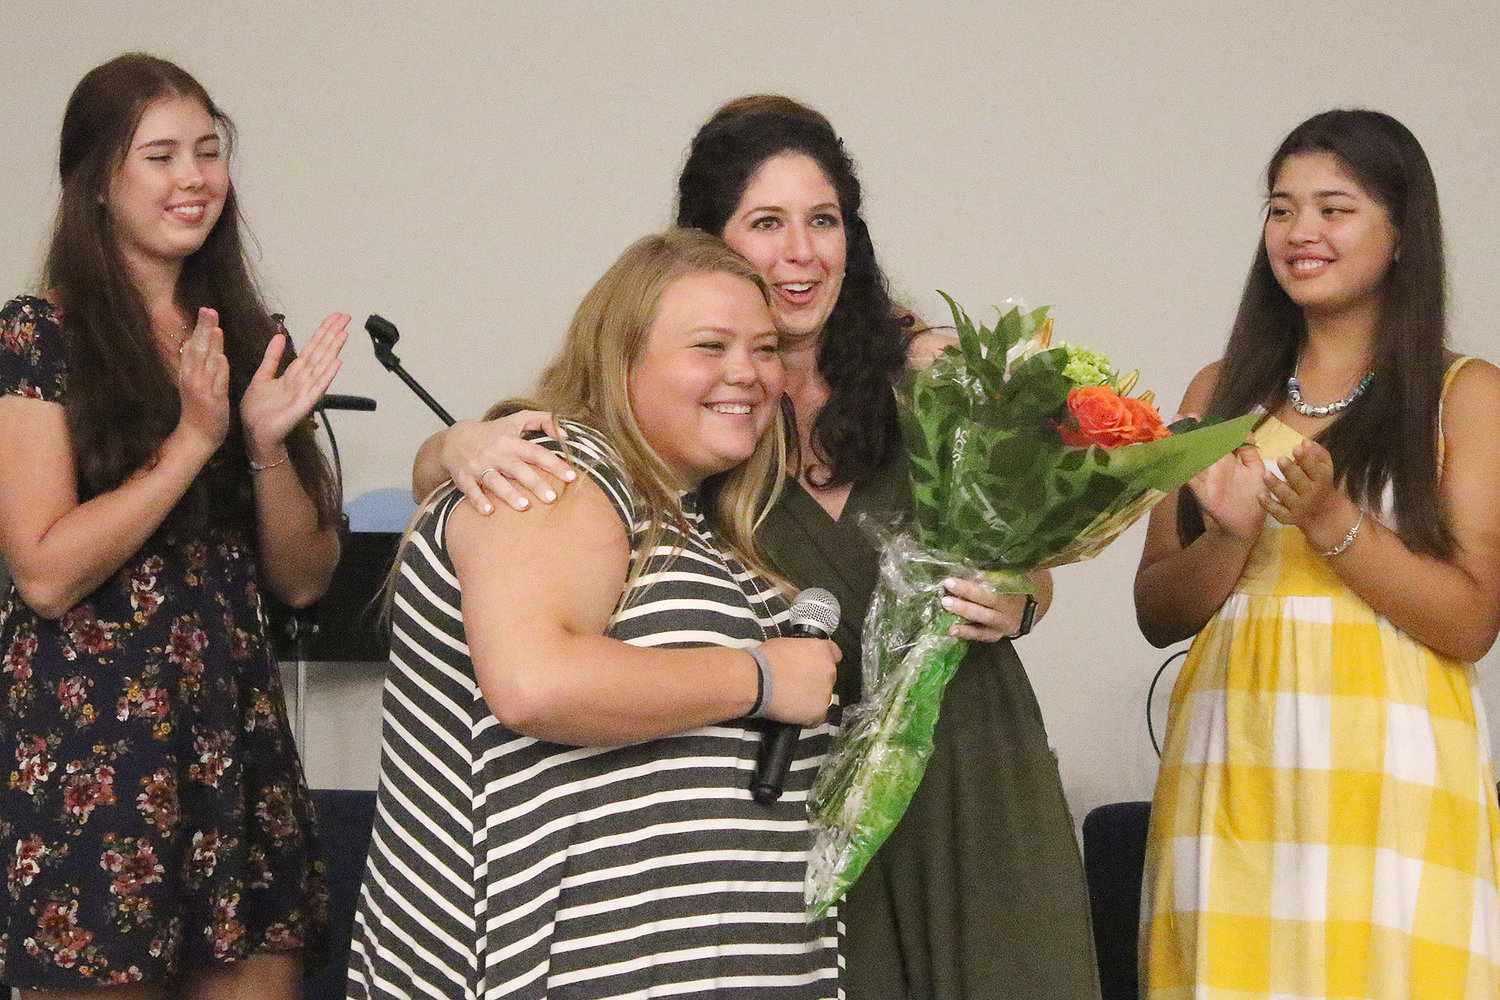 Katie Mahnken received flowers for her dedication to the girls. She is a Program Coordinator with The Greatest Exchange and lives in Kazakhstan for six months each year to find young women to participate in the program.